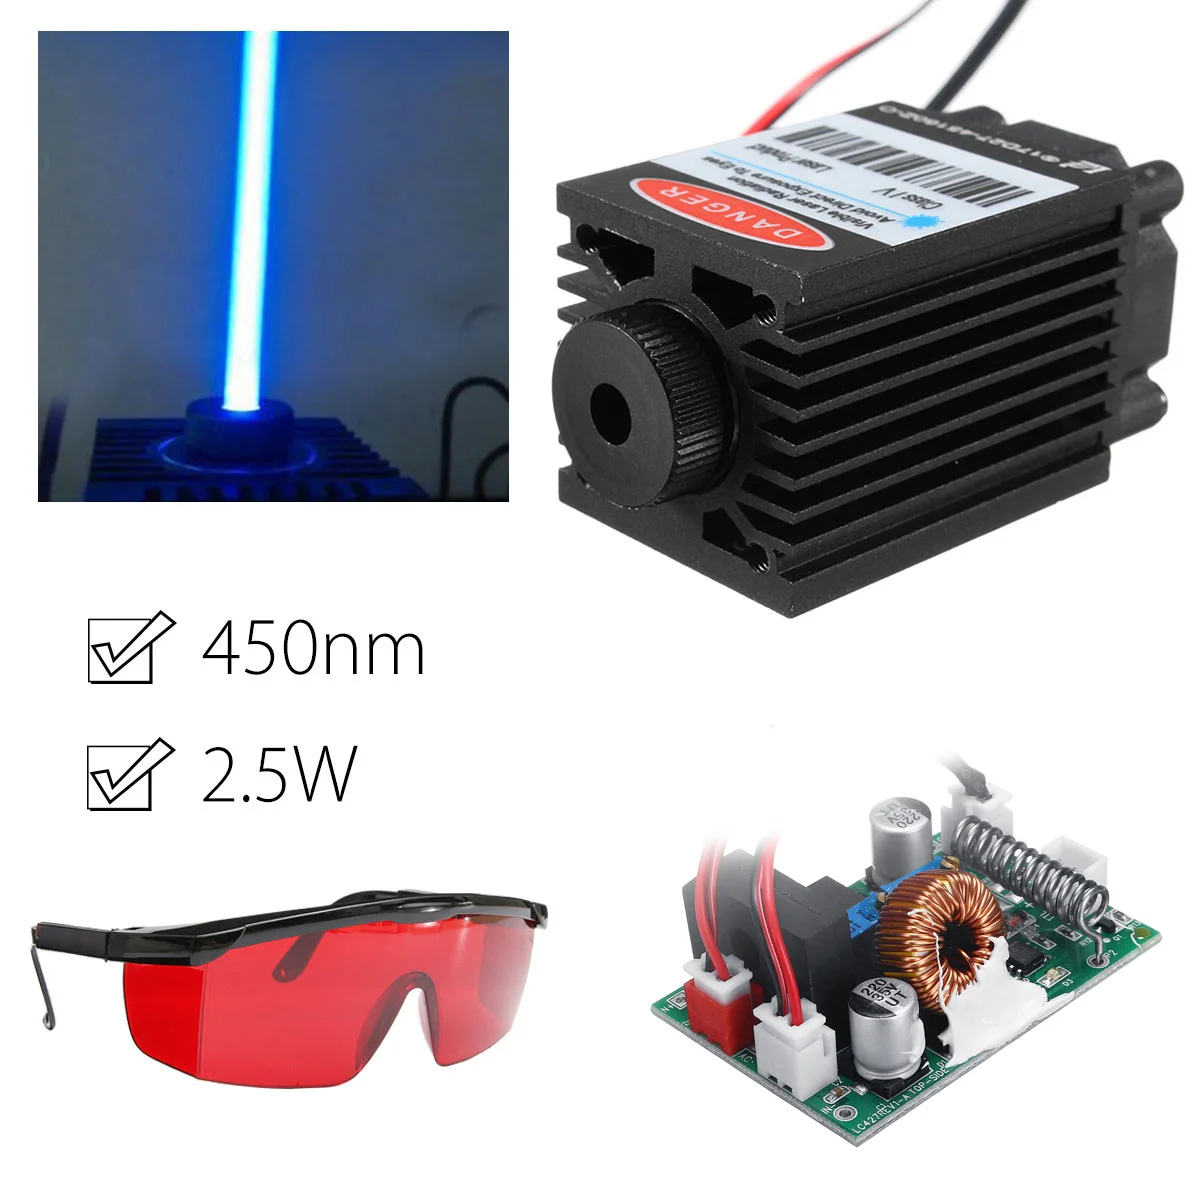 2.5W 450nm Blue Laser Module TTL 12V Focusable High Power + Goggles for CNC Cutting Laser Engraving Machine Woodworking Parts enlarge